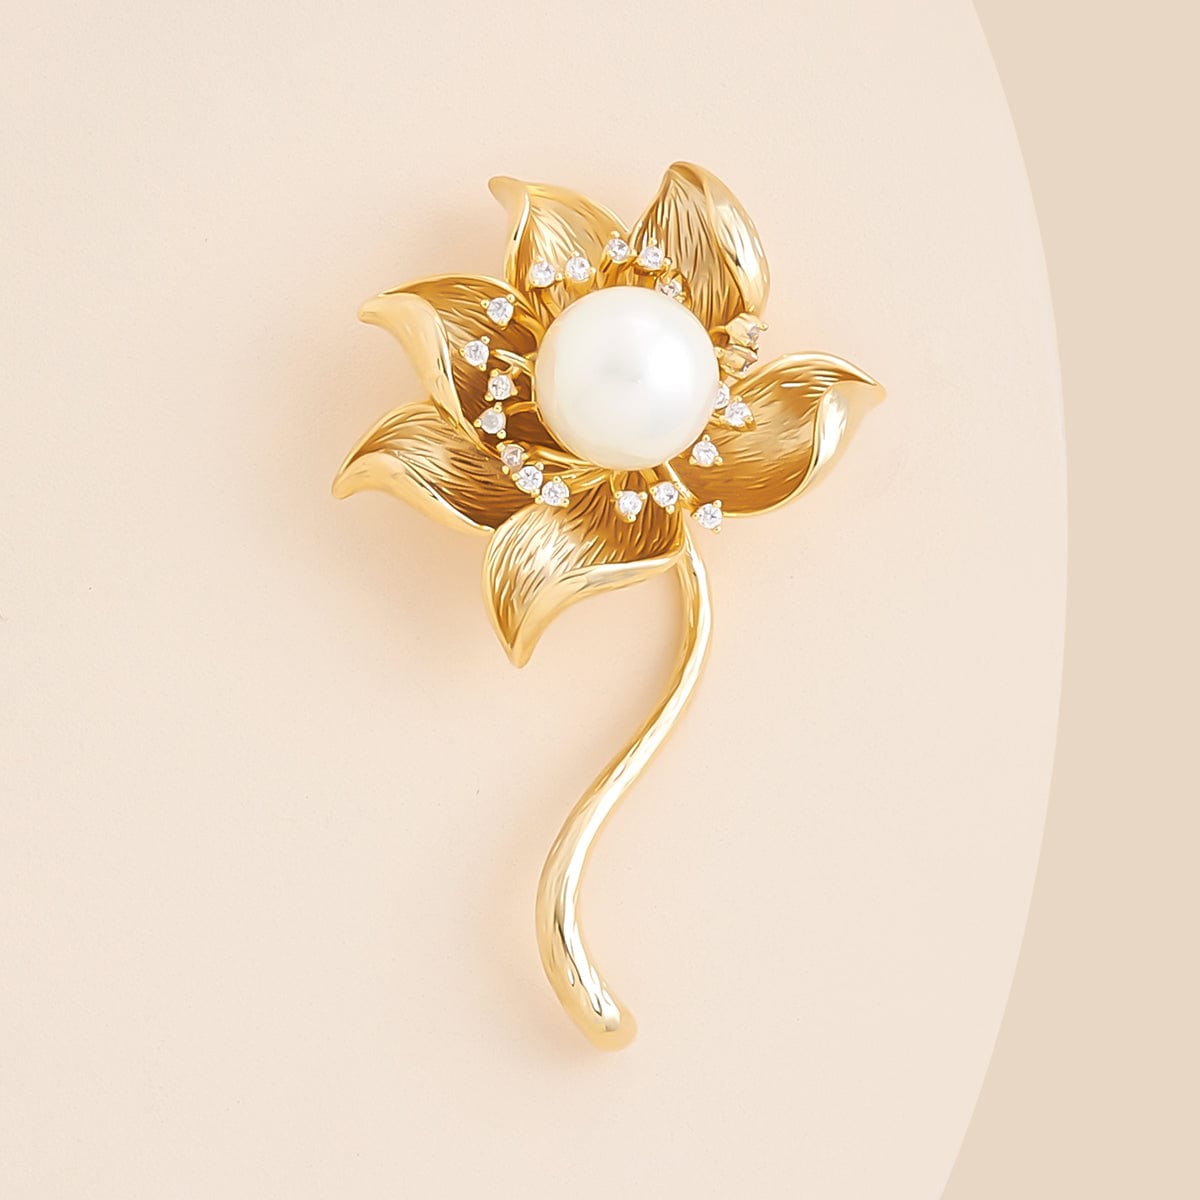 CRAFTSHOPPYCo Enamel Pin Gold Color Pearl Brooches for Women Scarf Buckle Lapel Pin and Brooch Jewelry Luxury Clothing Accessories Brooches for Wedding